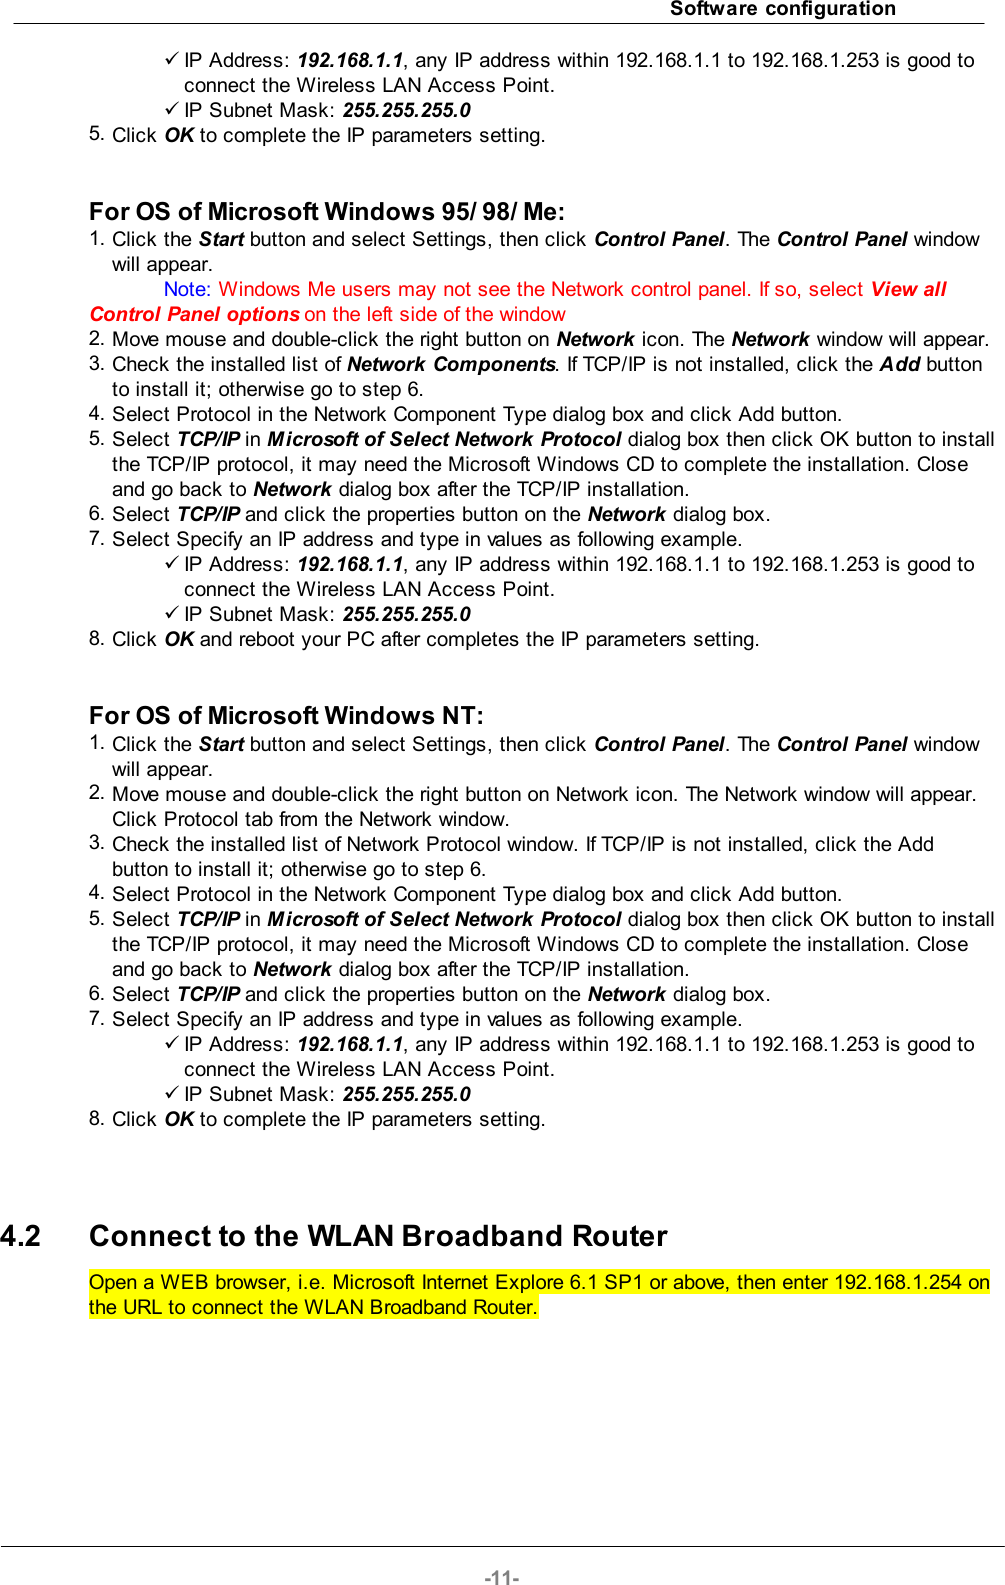 Software configuration-11-üIP Address: 192.168.1.1, any IP address within 192.168.1.1 to 192.168.1.253 is good toconnect the Wireless LAN Access Point.üIP Subnet Mask: 255.255.255.05. Click OK to complete the IP parameters setting.For OS of Microsoft Windows 95/ 98/ Me:1. Click the Start button and select Settings, then click Control Panel. The Control Panel windowwill appear.Note: Windows Me users may not see the Network control panel. If so, select View allControl Panel options on the left side of the window2. Move mouse and double-click the right button on Network icon. The Network window will appear.3. Check the installed list of Network Components. If TCP/IP is not installed, click the Add buttonto install it; otherwise go to step 6.4. Select Protocol in the Network Component Type dialog box and click Add button.5. Select TCP/IP in Microsoft of Select Network Protocol dialog box then click OK button to installthe TCP/IP protocol, it may need the Microsoft Windows CD to complete the installation. Closeand go back to Network dialog box after the TCP/IP installation.6. Select TCP/IP and click the properties button on the Network dialog box.7. Select Specify an IP address and type in values as following example.üIP Address: 192.168.1.1, any IP address within 192.168.1.1 to 192.168.1.253 is good toconnect the Wireless LAN Access Point.üIP Subnet Mask: 255.255.255.08. Click OK and reboot your PC after completes the IP parameters setting.For OS of Microsoft Windows NT:1. Click the Start button and select Settings, then click Control Panel. The Control Panel windowwill appear.2. Move mouse and double-click the right button on Network icon. The Network window will appear.Click Protocol tab from the Network window.3. Check the installed list of Network Protocol window. If TCP/IP is not installed, click the Addbutton to install it; otherwise go to step 6.4. Select Protocol in the Network Component Type dialog box and click Add button.5. Select TCP/IP in Microsoft of Select Network Protocol dialog box then click OK button to installthe TCP/IP protocol, it may need the Microsoft Windows CD to complete the installation. Closeand go back to Network dialog box after the TCP/IP installation.6. Select TCP/IP and click the properties button on the Network dialog box.7. Select Specify an IP address and type in values as following example.üIP Address: 192.168.1.1, any IP address within 192.168.1.1 to 192.168.1.253 is good toconnect the Wireless LAN Access Point.üIP Subnet Mask: 255.255.255.08. Click OK to complete the IP parameters setting.4.2 Connect to the WLAN Broadband RouterOpen a WEB browser, i.e. Microsoft Internet Explore 6.1 SP1 or above, then enter 192.168.1.254 onthe URL to connect the WLAN Broadband Router.